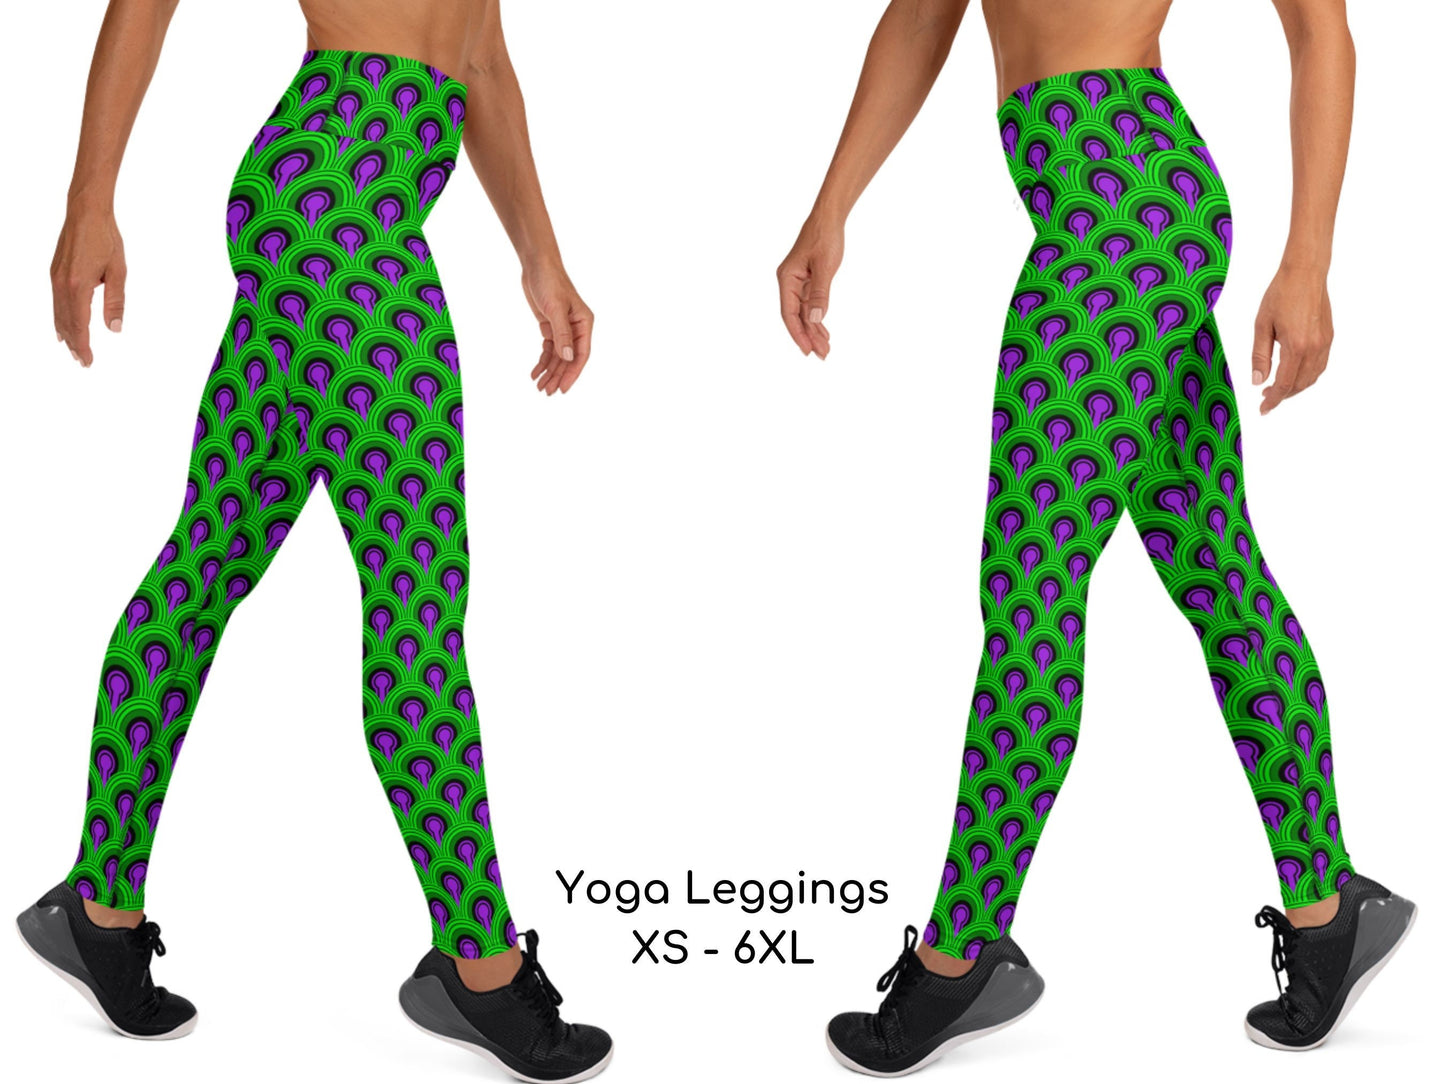 The Scary Hotel Sports Set, Yoga Leggings, Halloween, Cosplay, Gift for Her, Room 237, Horror, Birthday Gift